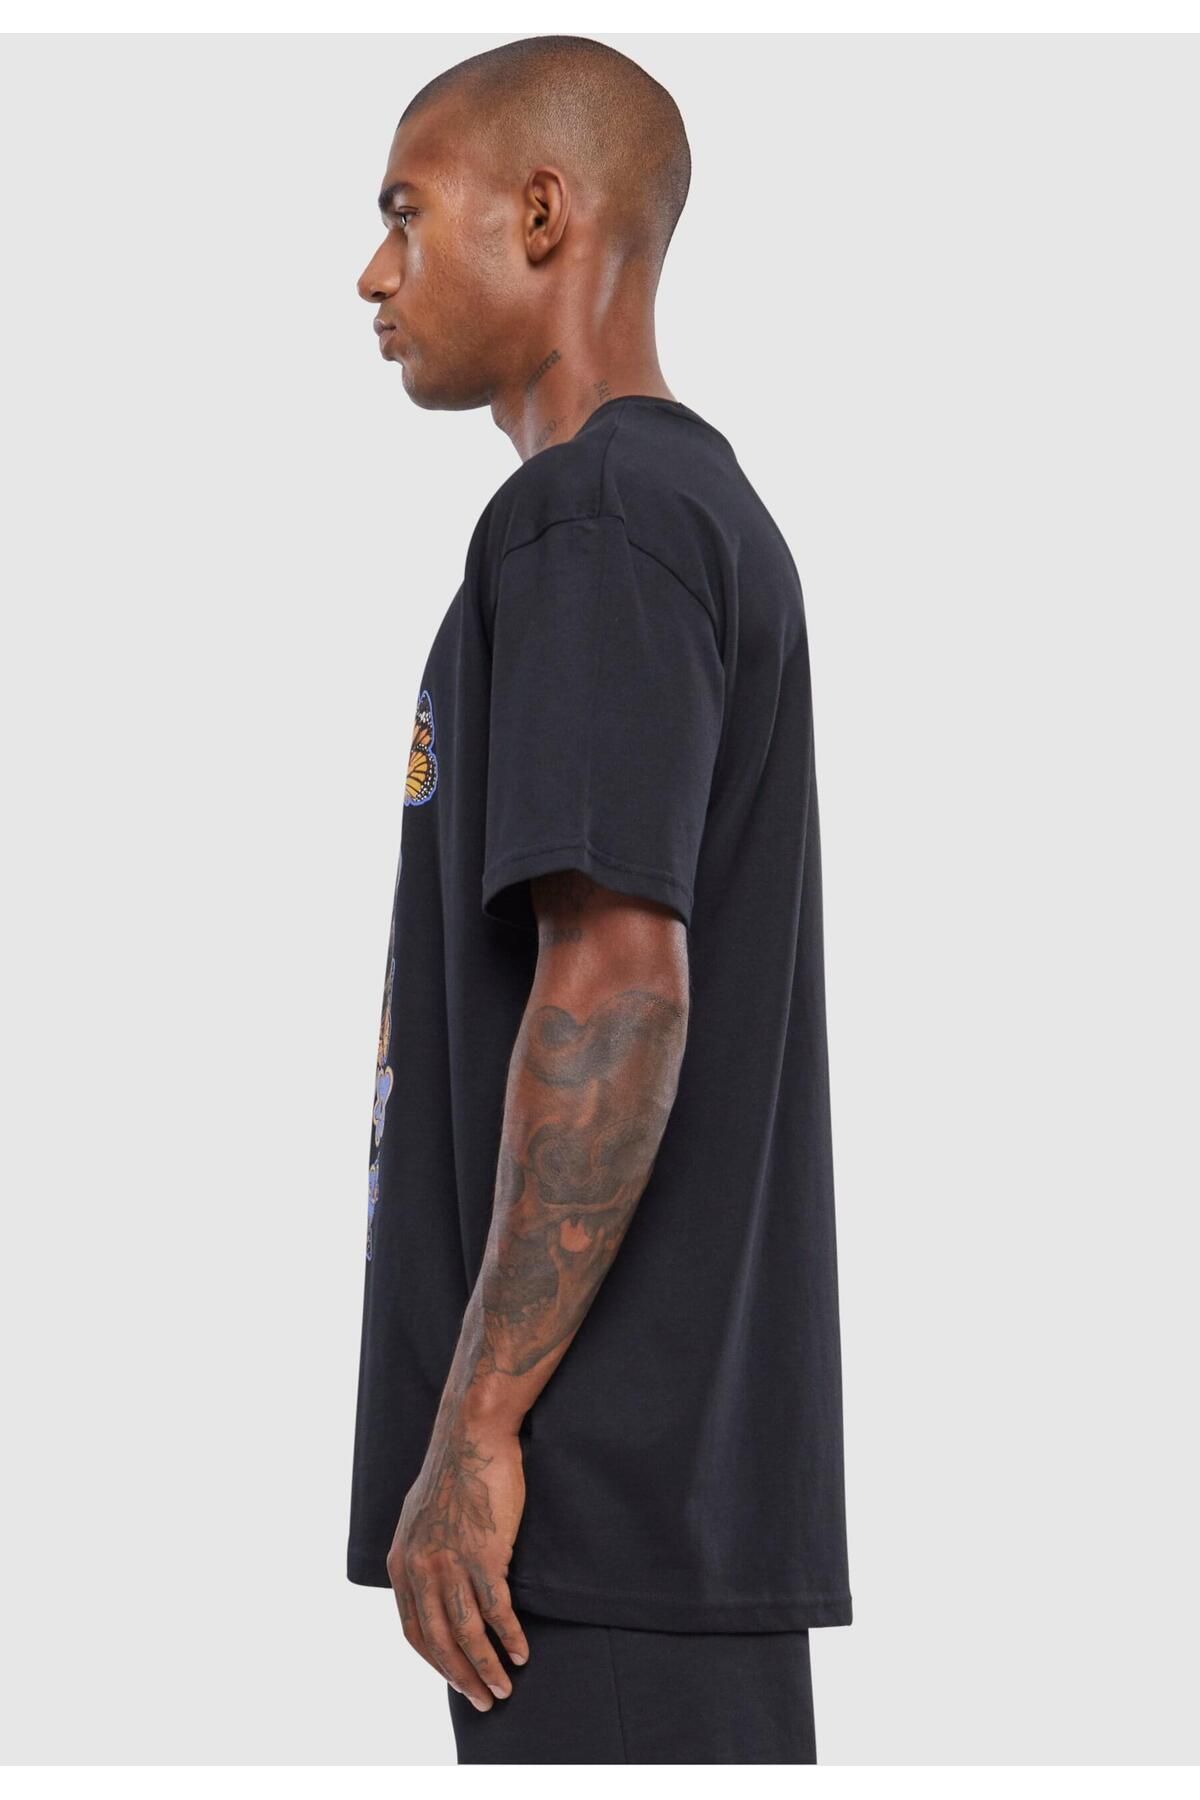 Upscale by Mister Tee T-Shirt Trendyol - Black - Oversize 